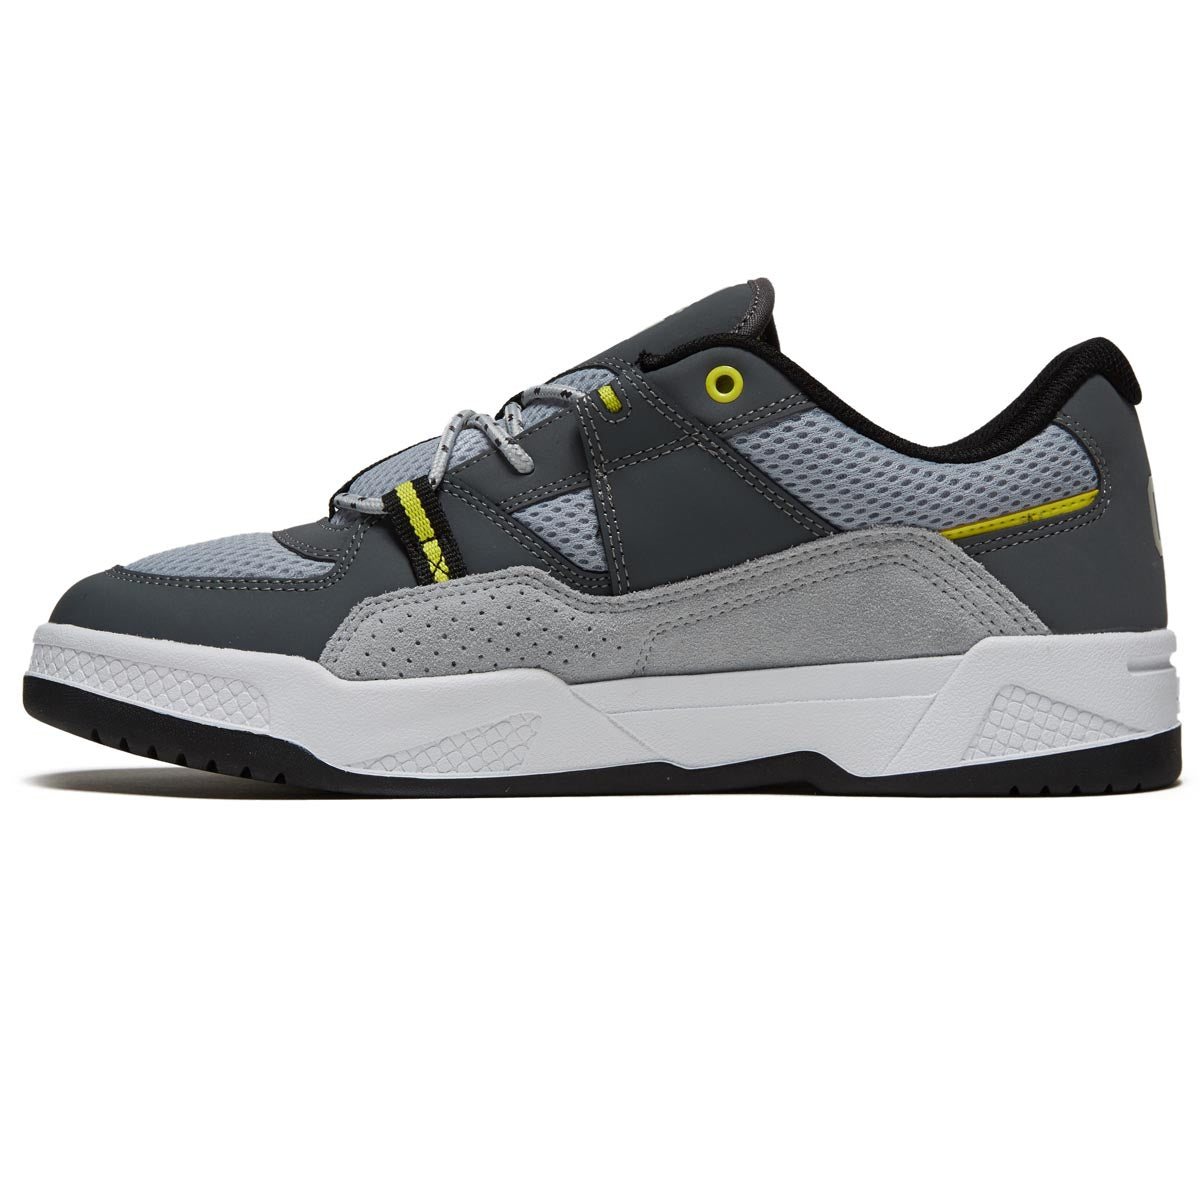 DC Construct Shoes - White/Grey/Yellow image 2